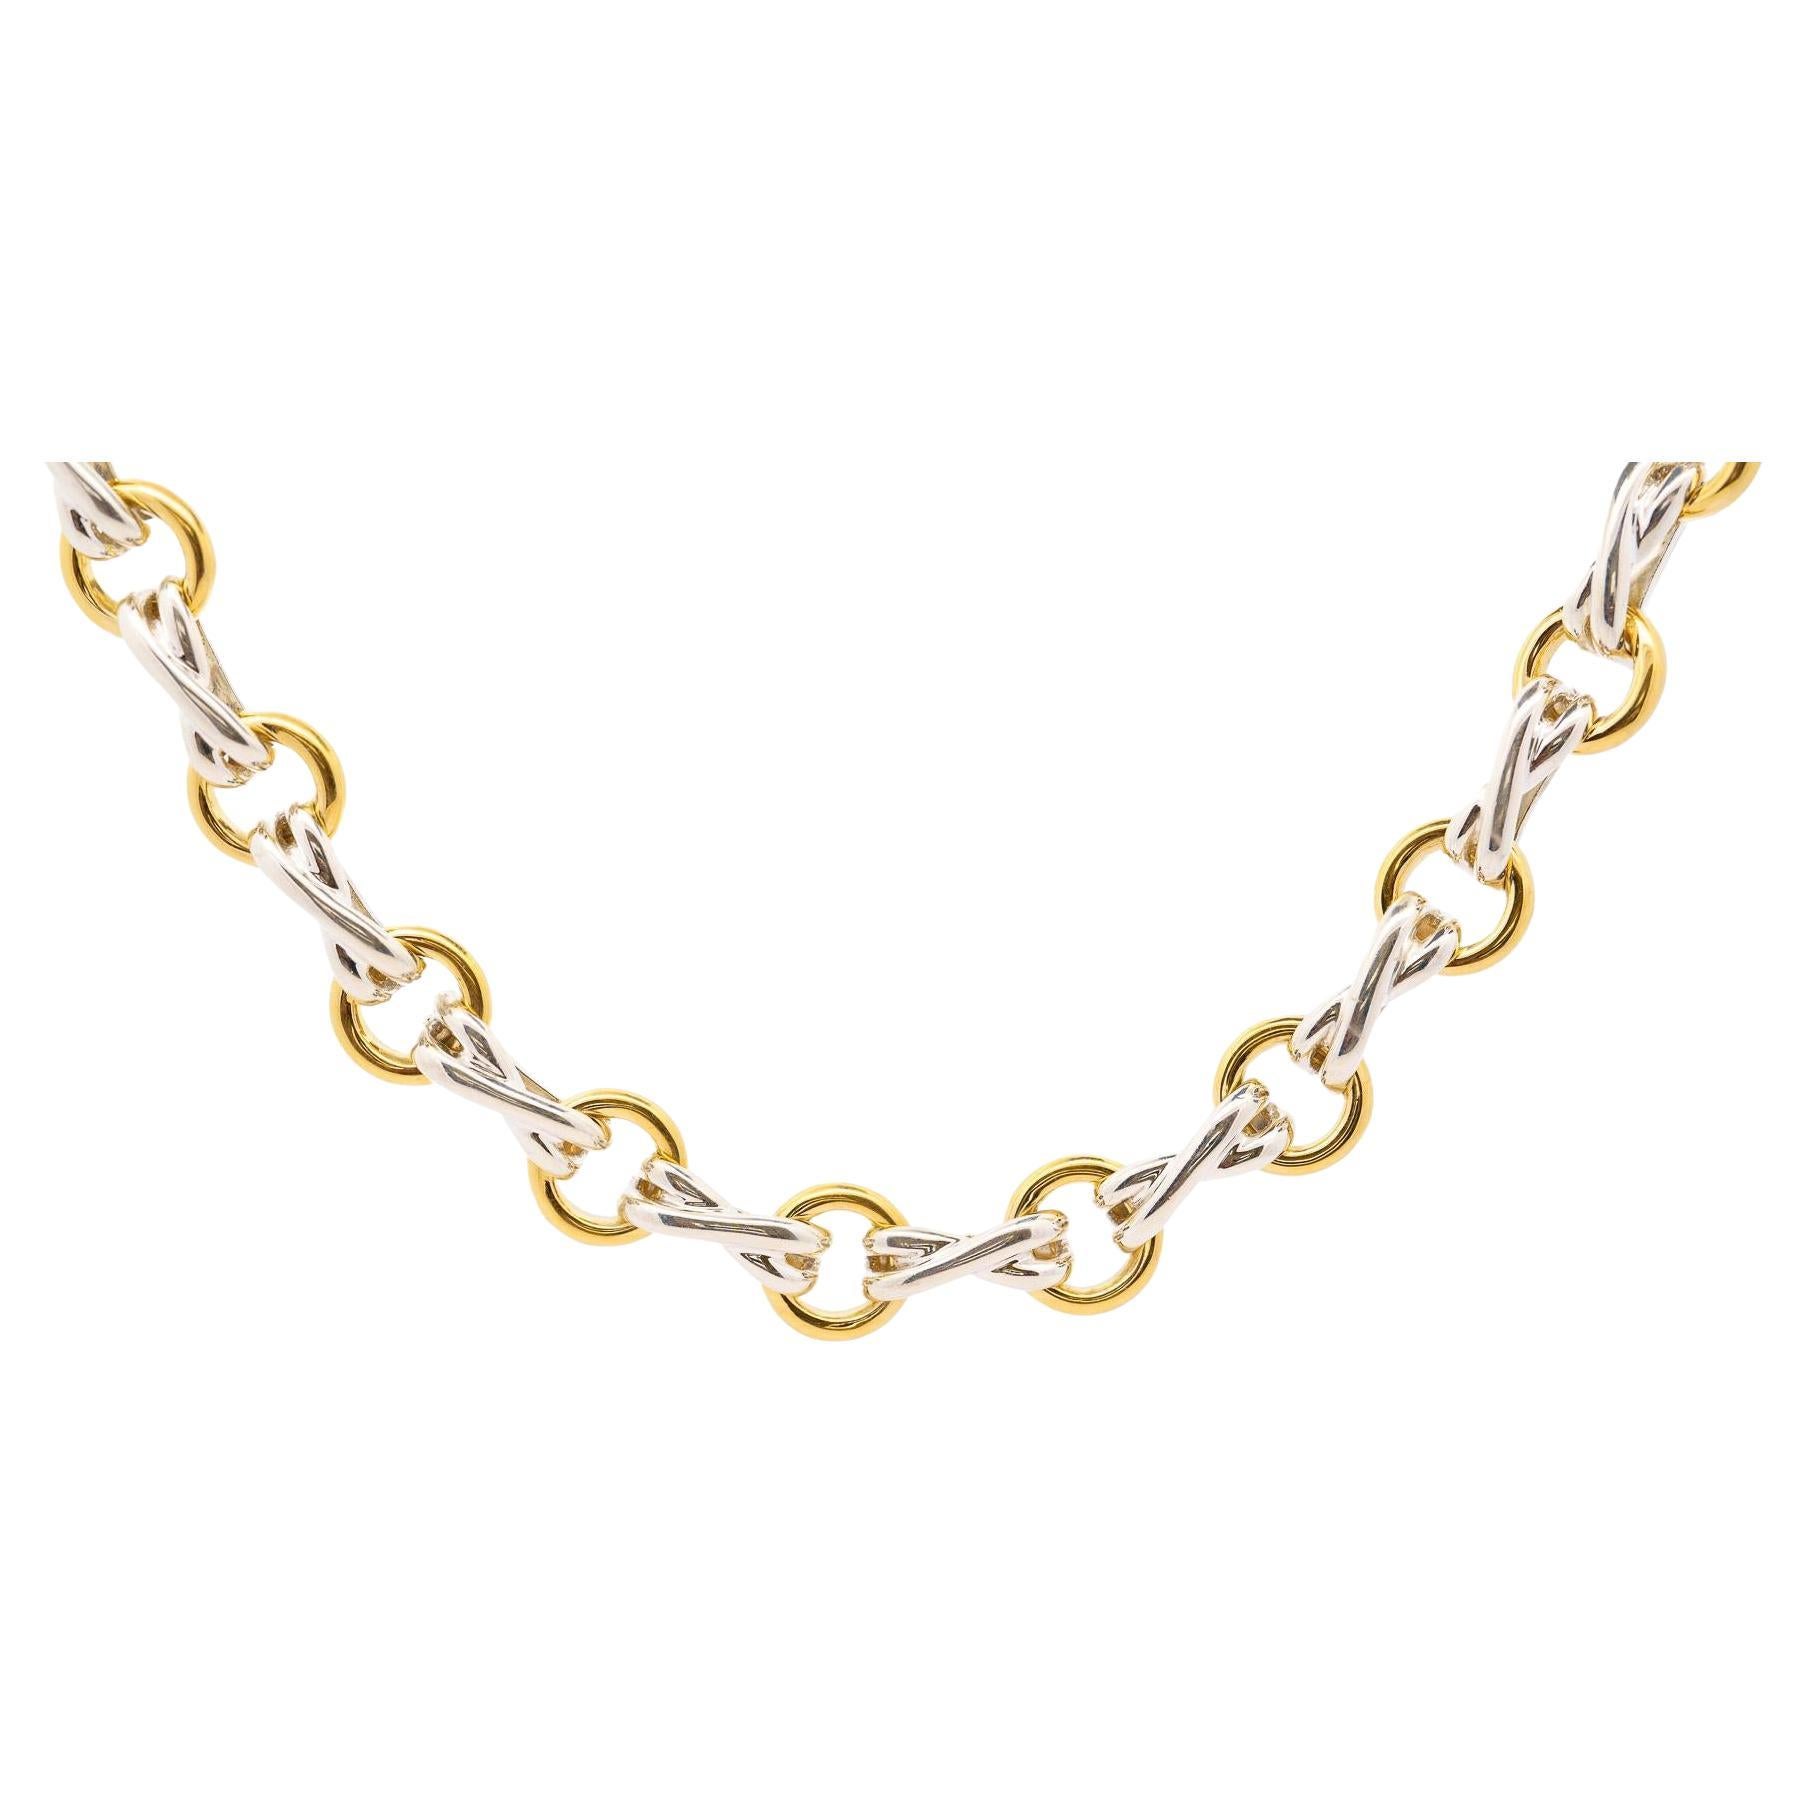 Vintage “X/O” Tiffany & Co and Paloma Picasso Dog Bone 18K Gold and Silver Link Chain Necklace. Made with all original parts and in excellent condition. 

Fixed with strong links that offer excellent coverage on the neck. A chain necklace that is